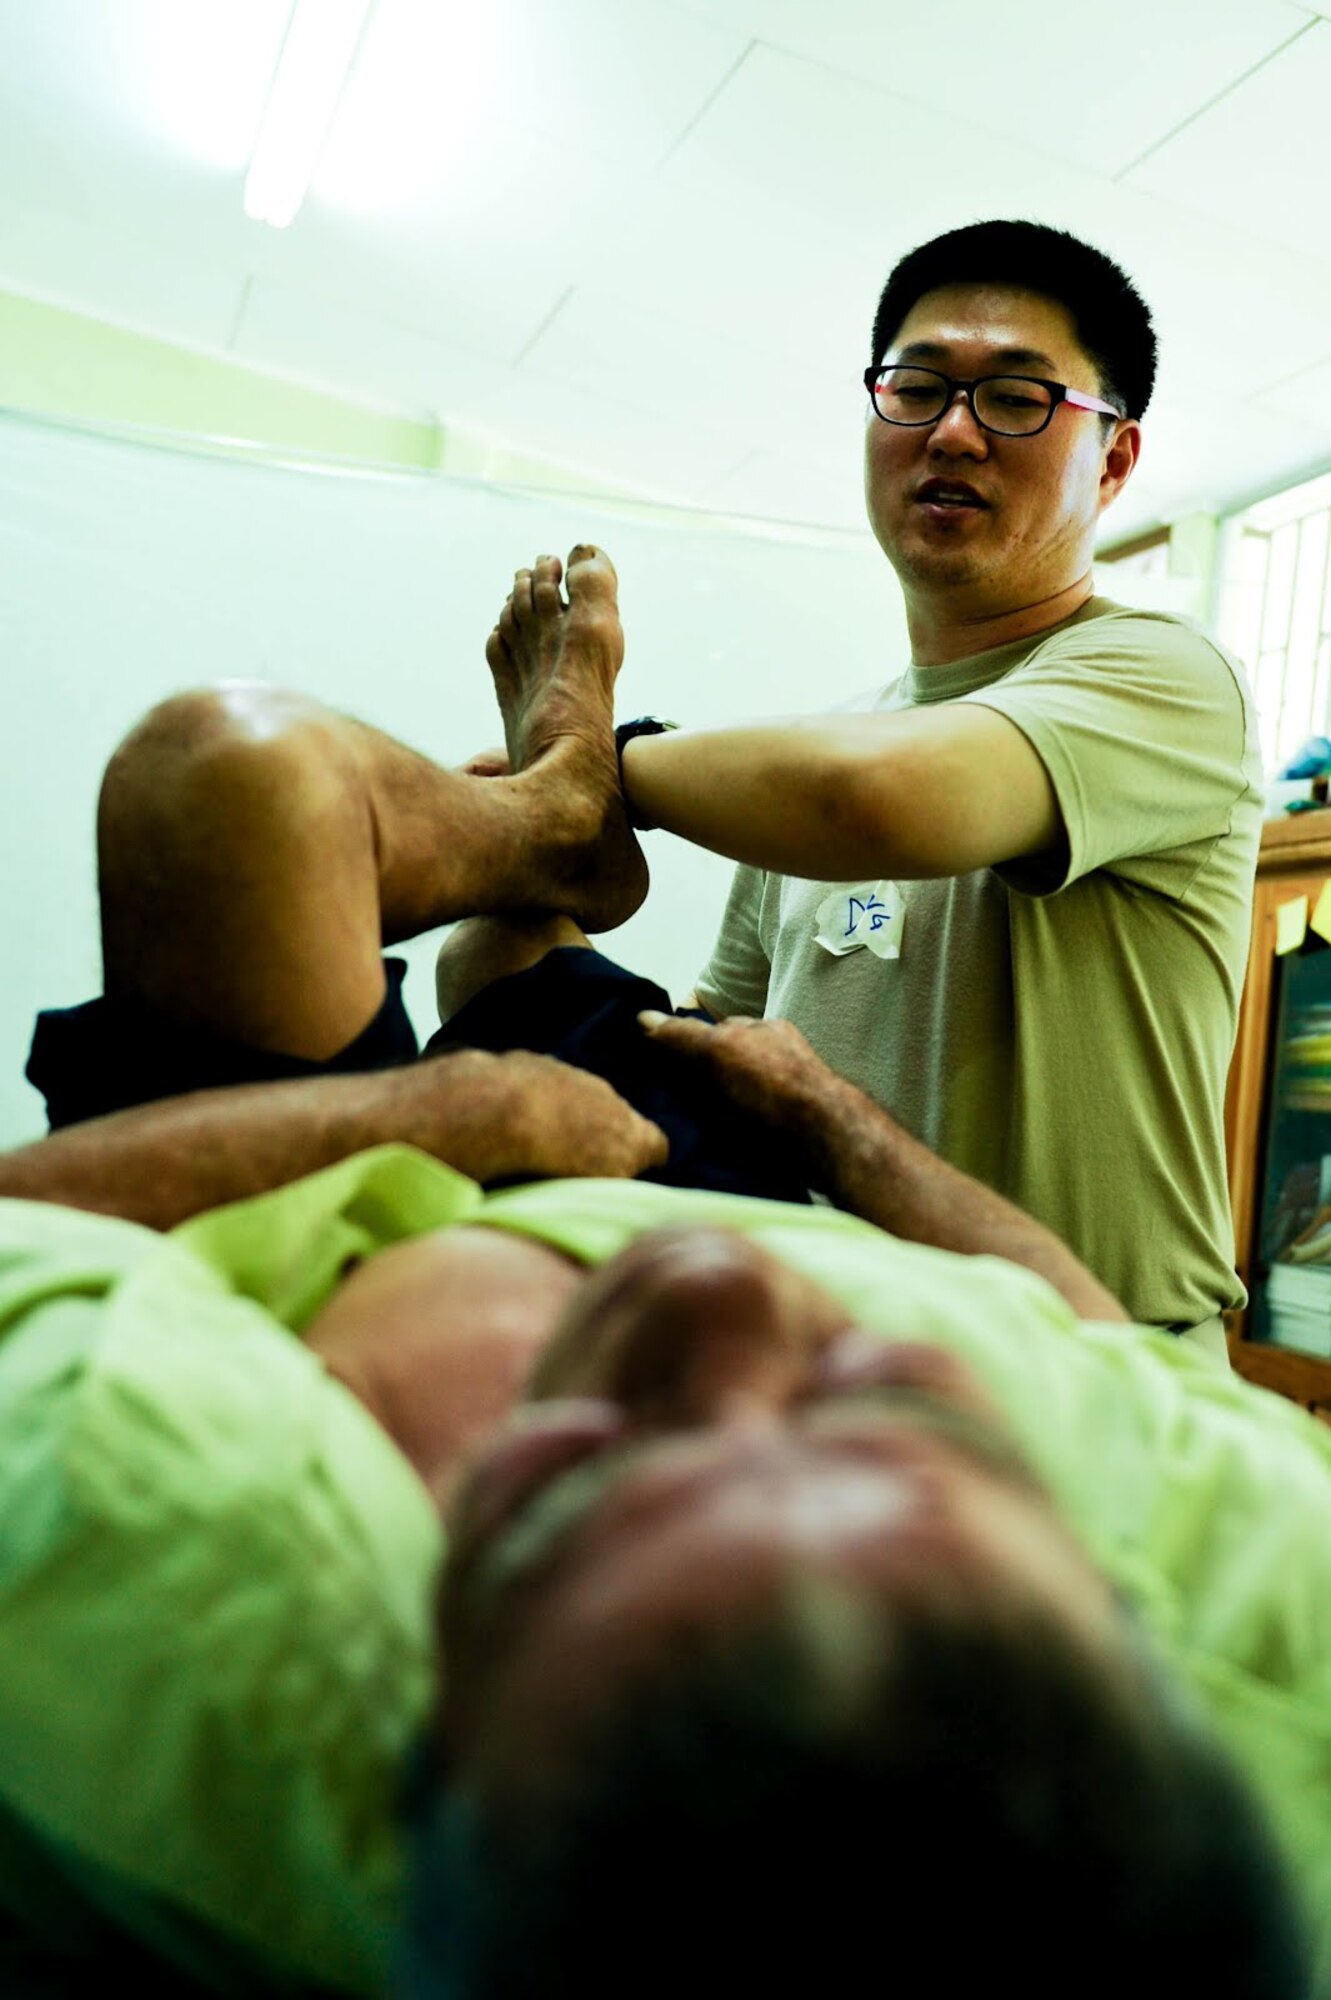 Air Force Maj. John Song, Medical Element Flight Surgeon, shows a Costa Rican patient stretches to alleviate back pain during a two-day joint Medical Readiness Training Exercise. Together with Costa Rica’s Ministry of Health and Social Services, JTF-Bravo delivered medical care to 704 patients.